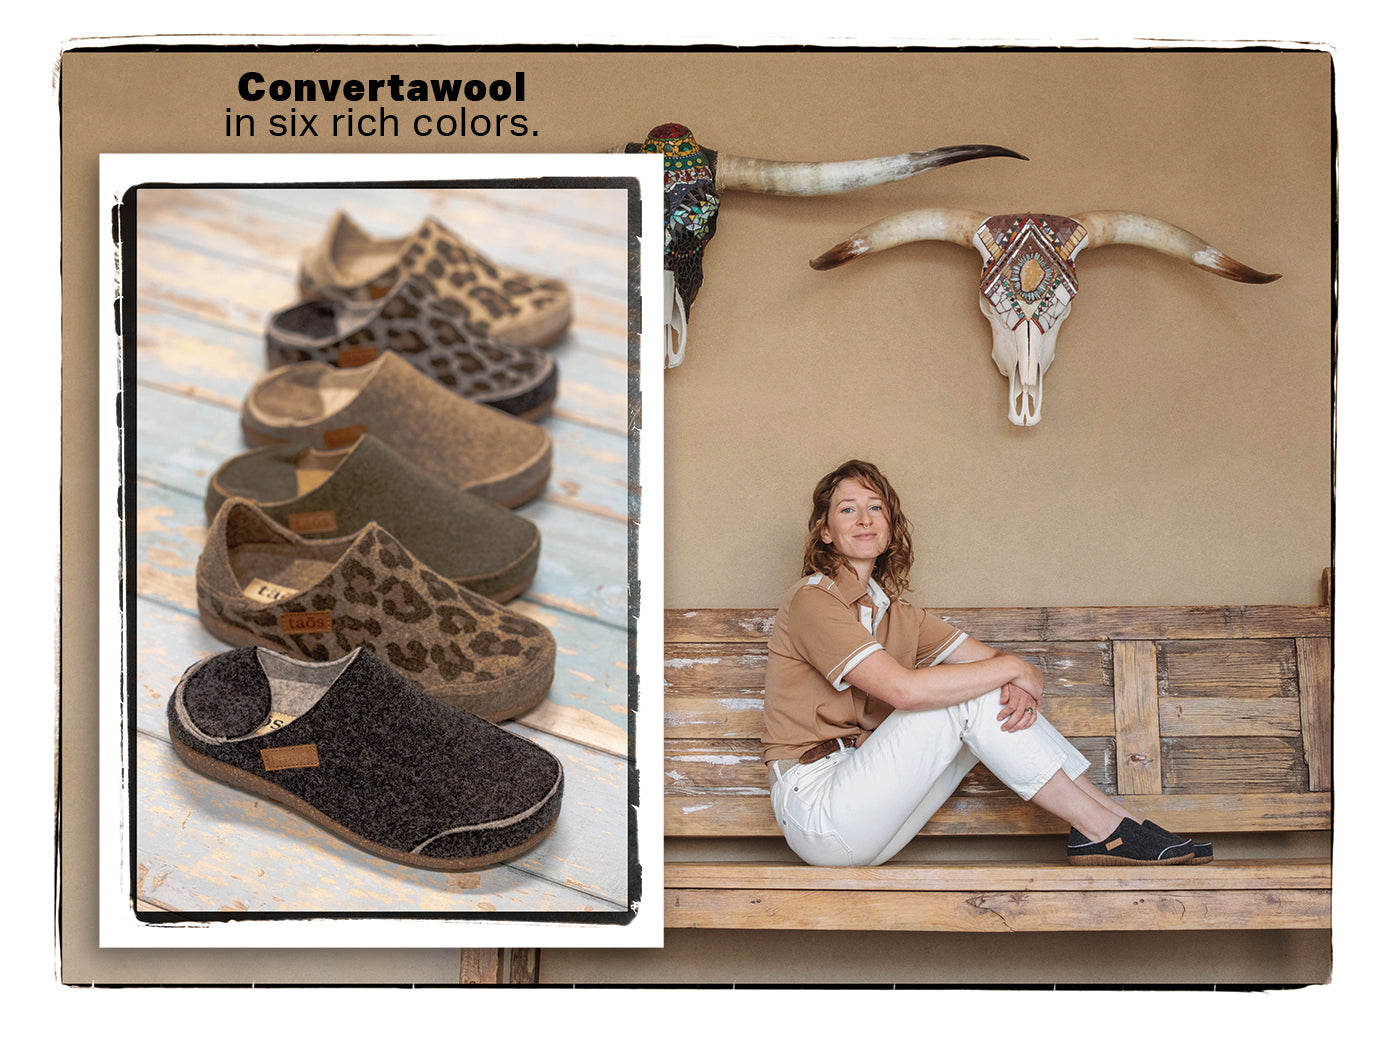 Taos Convertawool clogs in Six Rich Colors